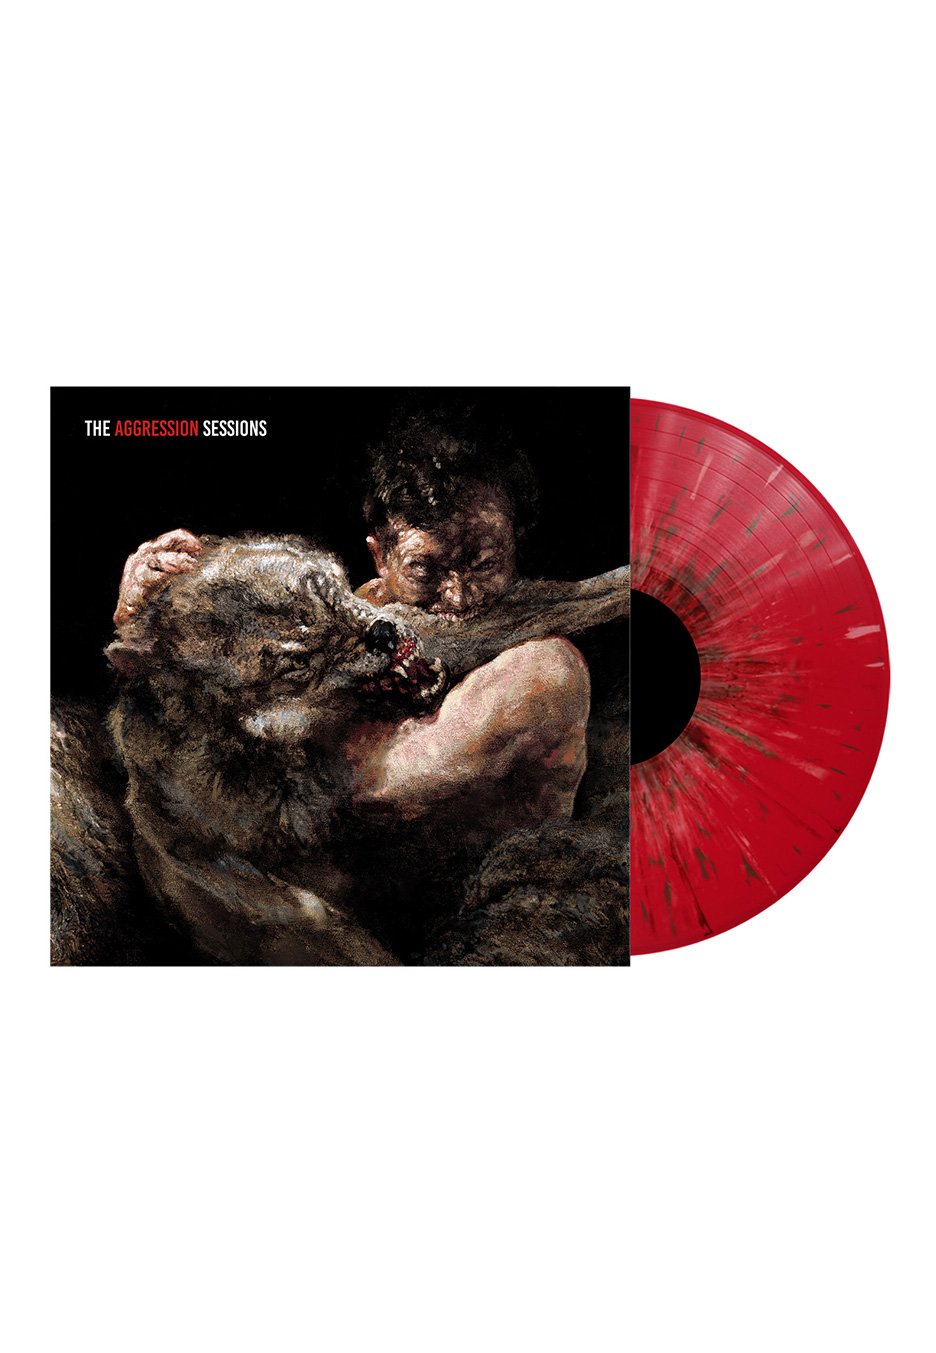 Thy Art Is Murder/Fit For An Autopsy/Malevolence - The Aggression Sessions Red/Black - Splattered Vinyl